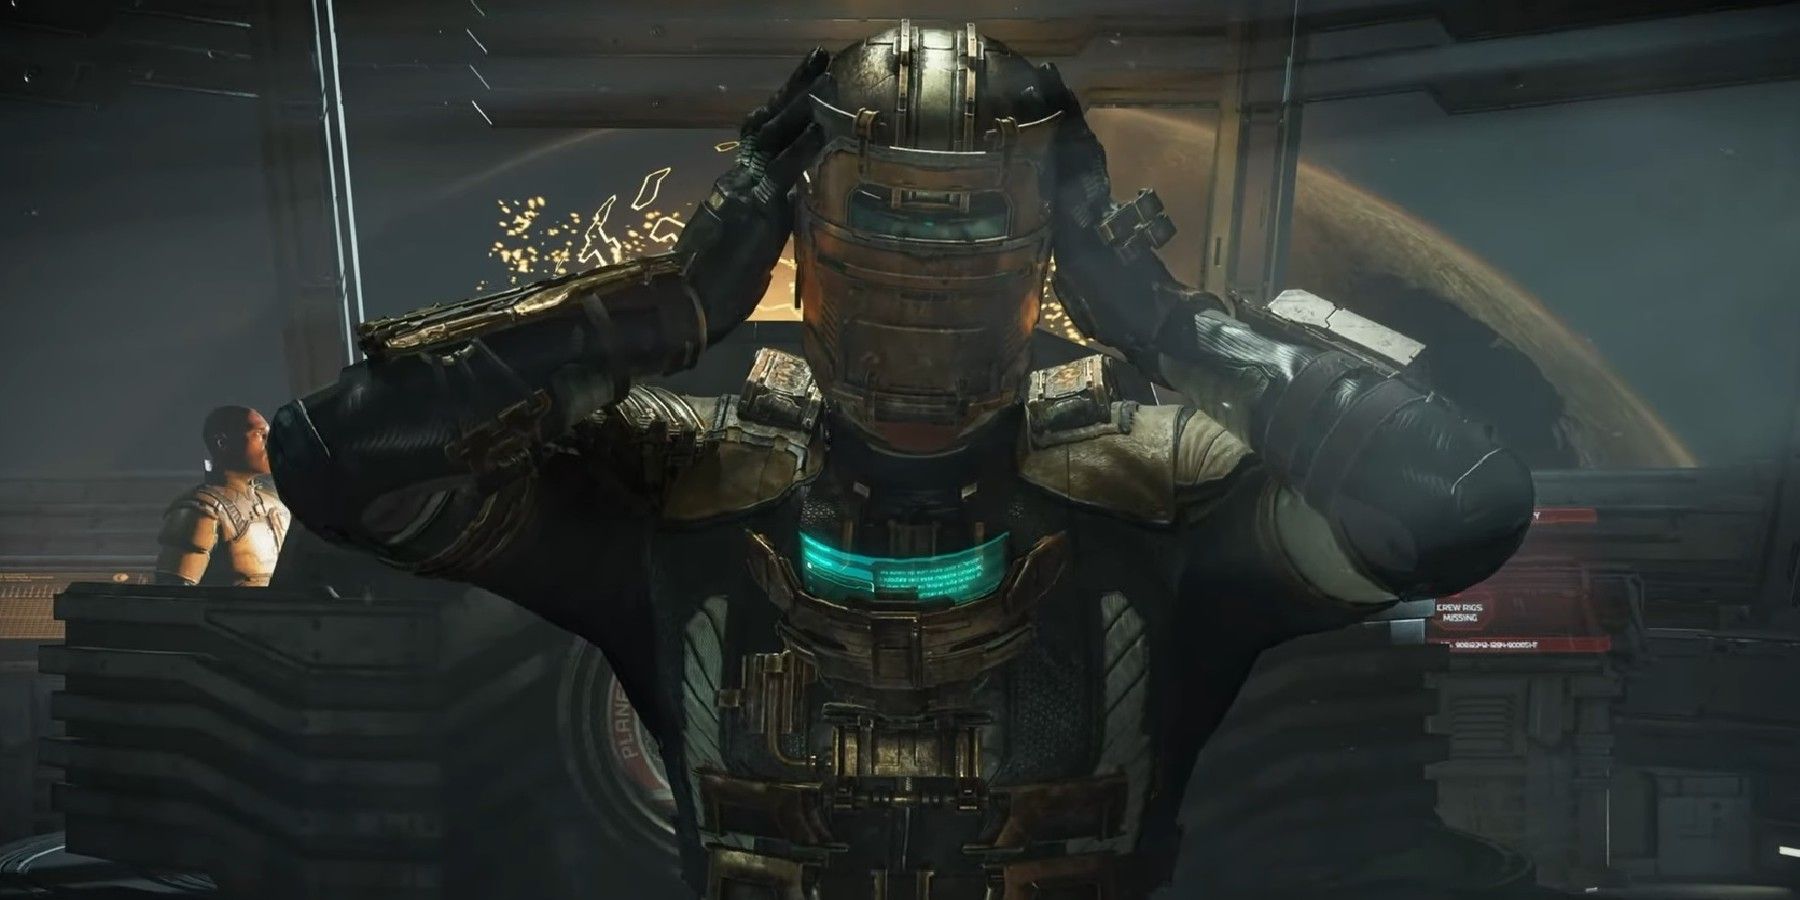 Hypothetical question: Let's say Motive gets the go ahead to remake Dead  Space 2, and it's successful. What would you want them to do with Dead  Space 3? Another faithful remake but